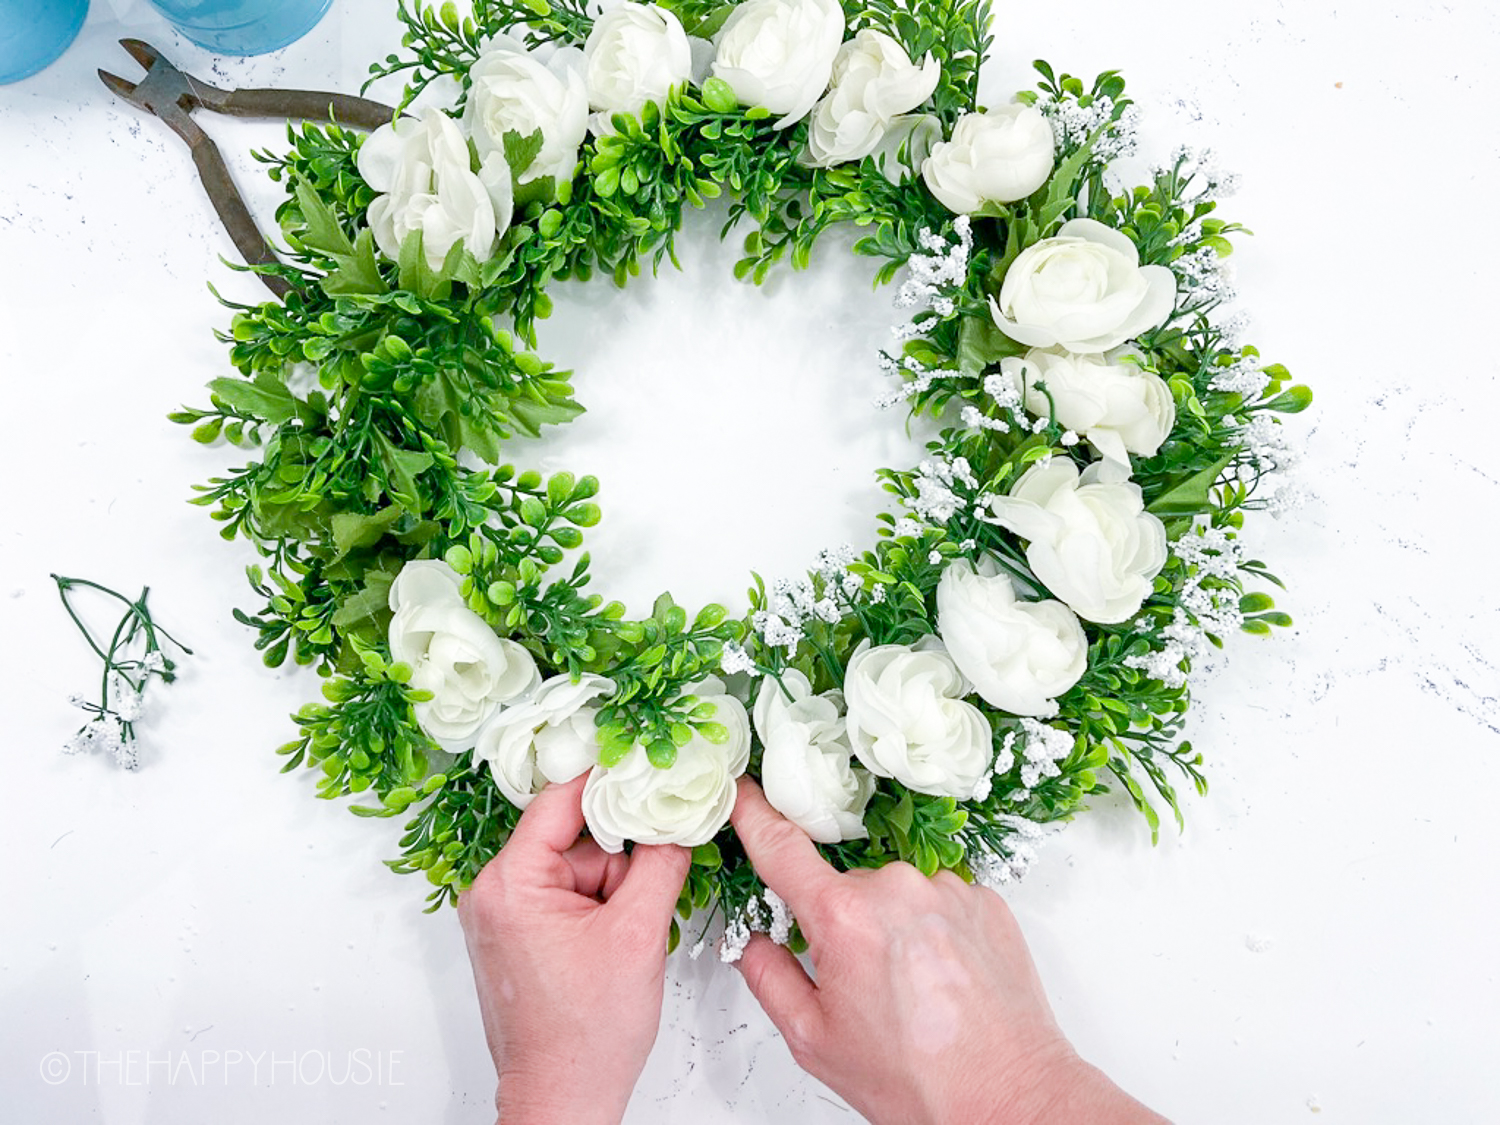 The pretty green wreath with white flowers all around it.